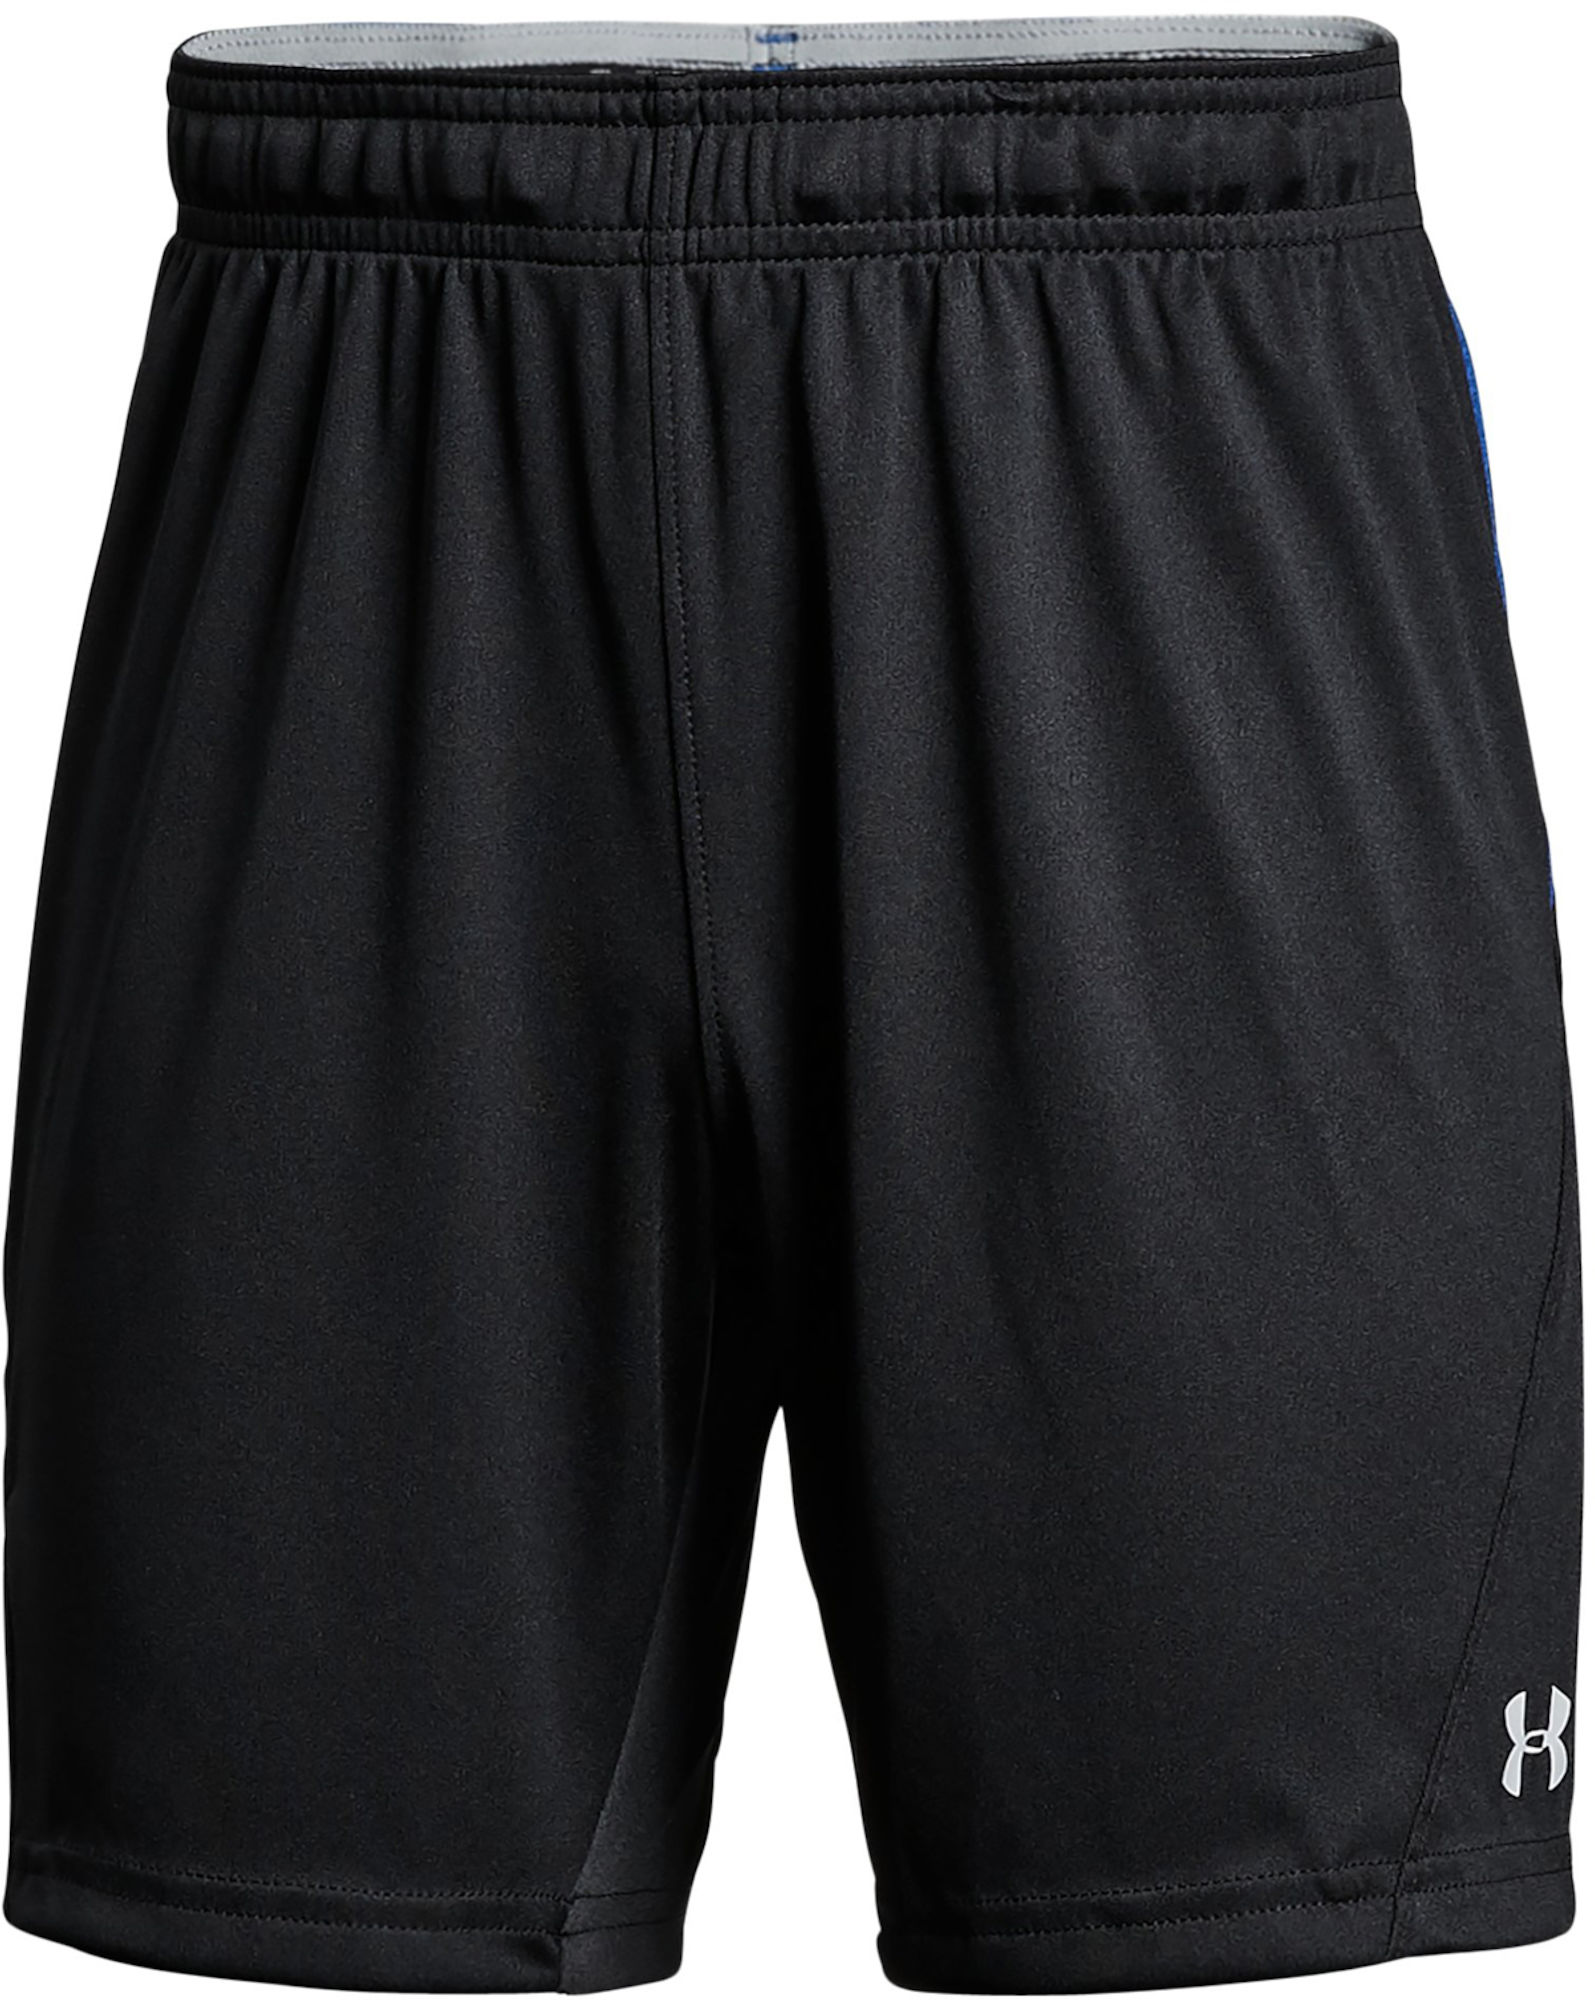 Under Armour Y Challenger II Knit Shorts Black L